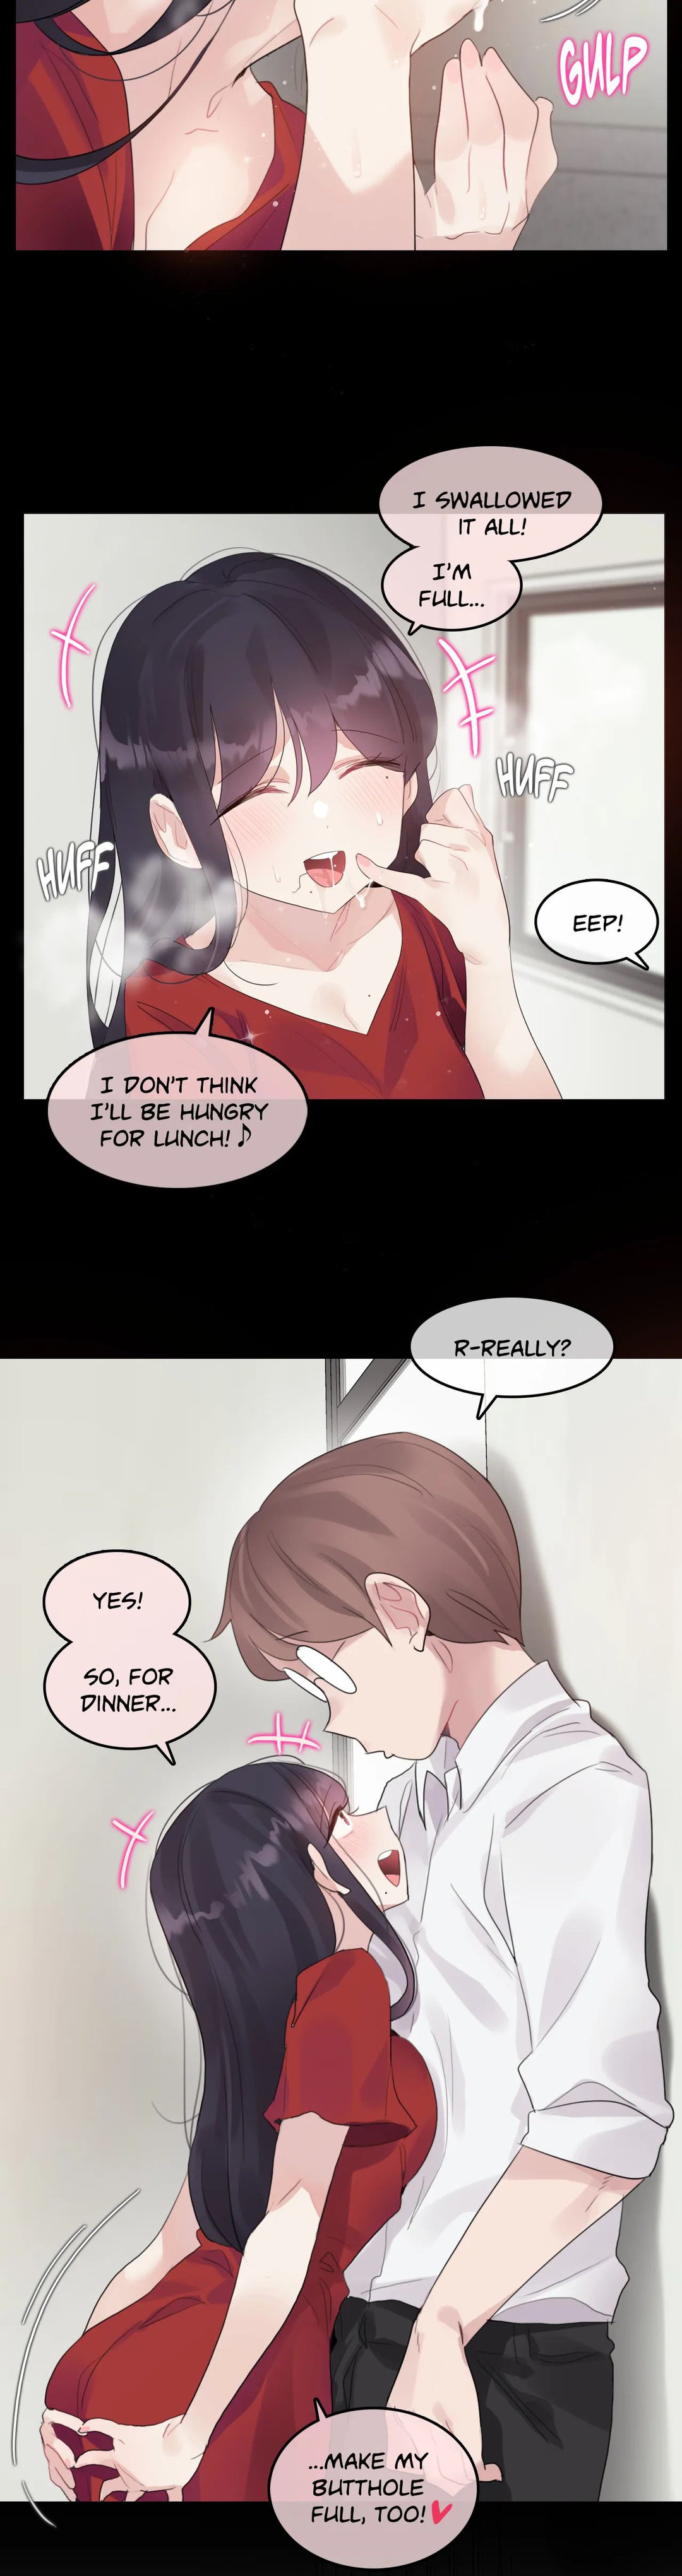 A Pervert’s Daily Life - Chapter 141 Page 3